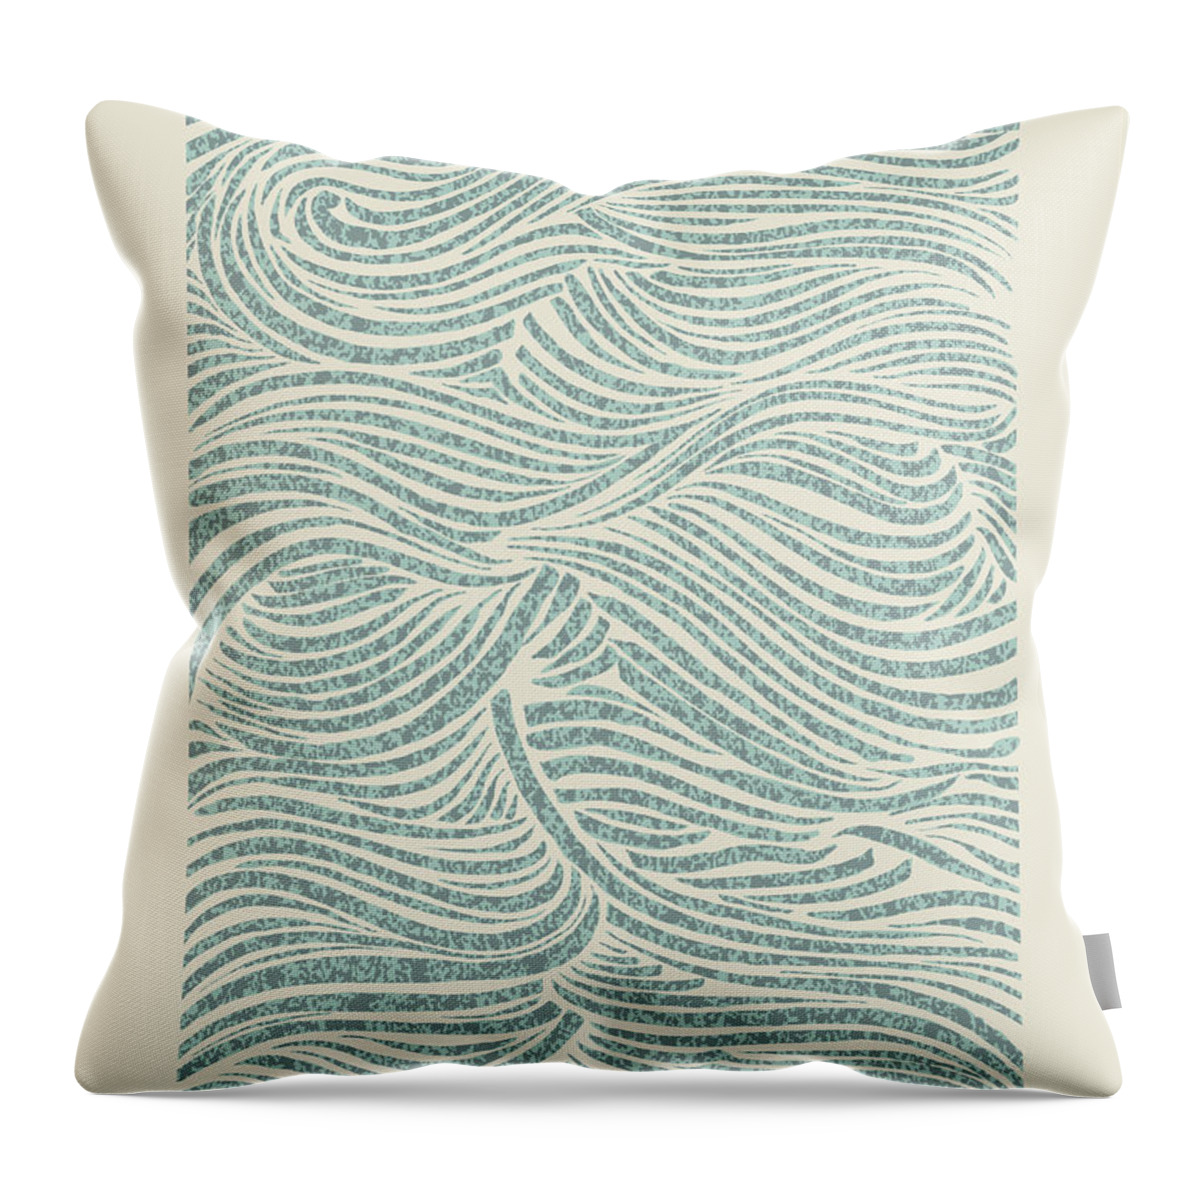 Curve Throw Pillow featuring the digital art Sea Waves by Cpd-lab